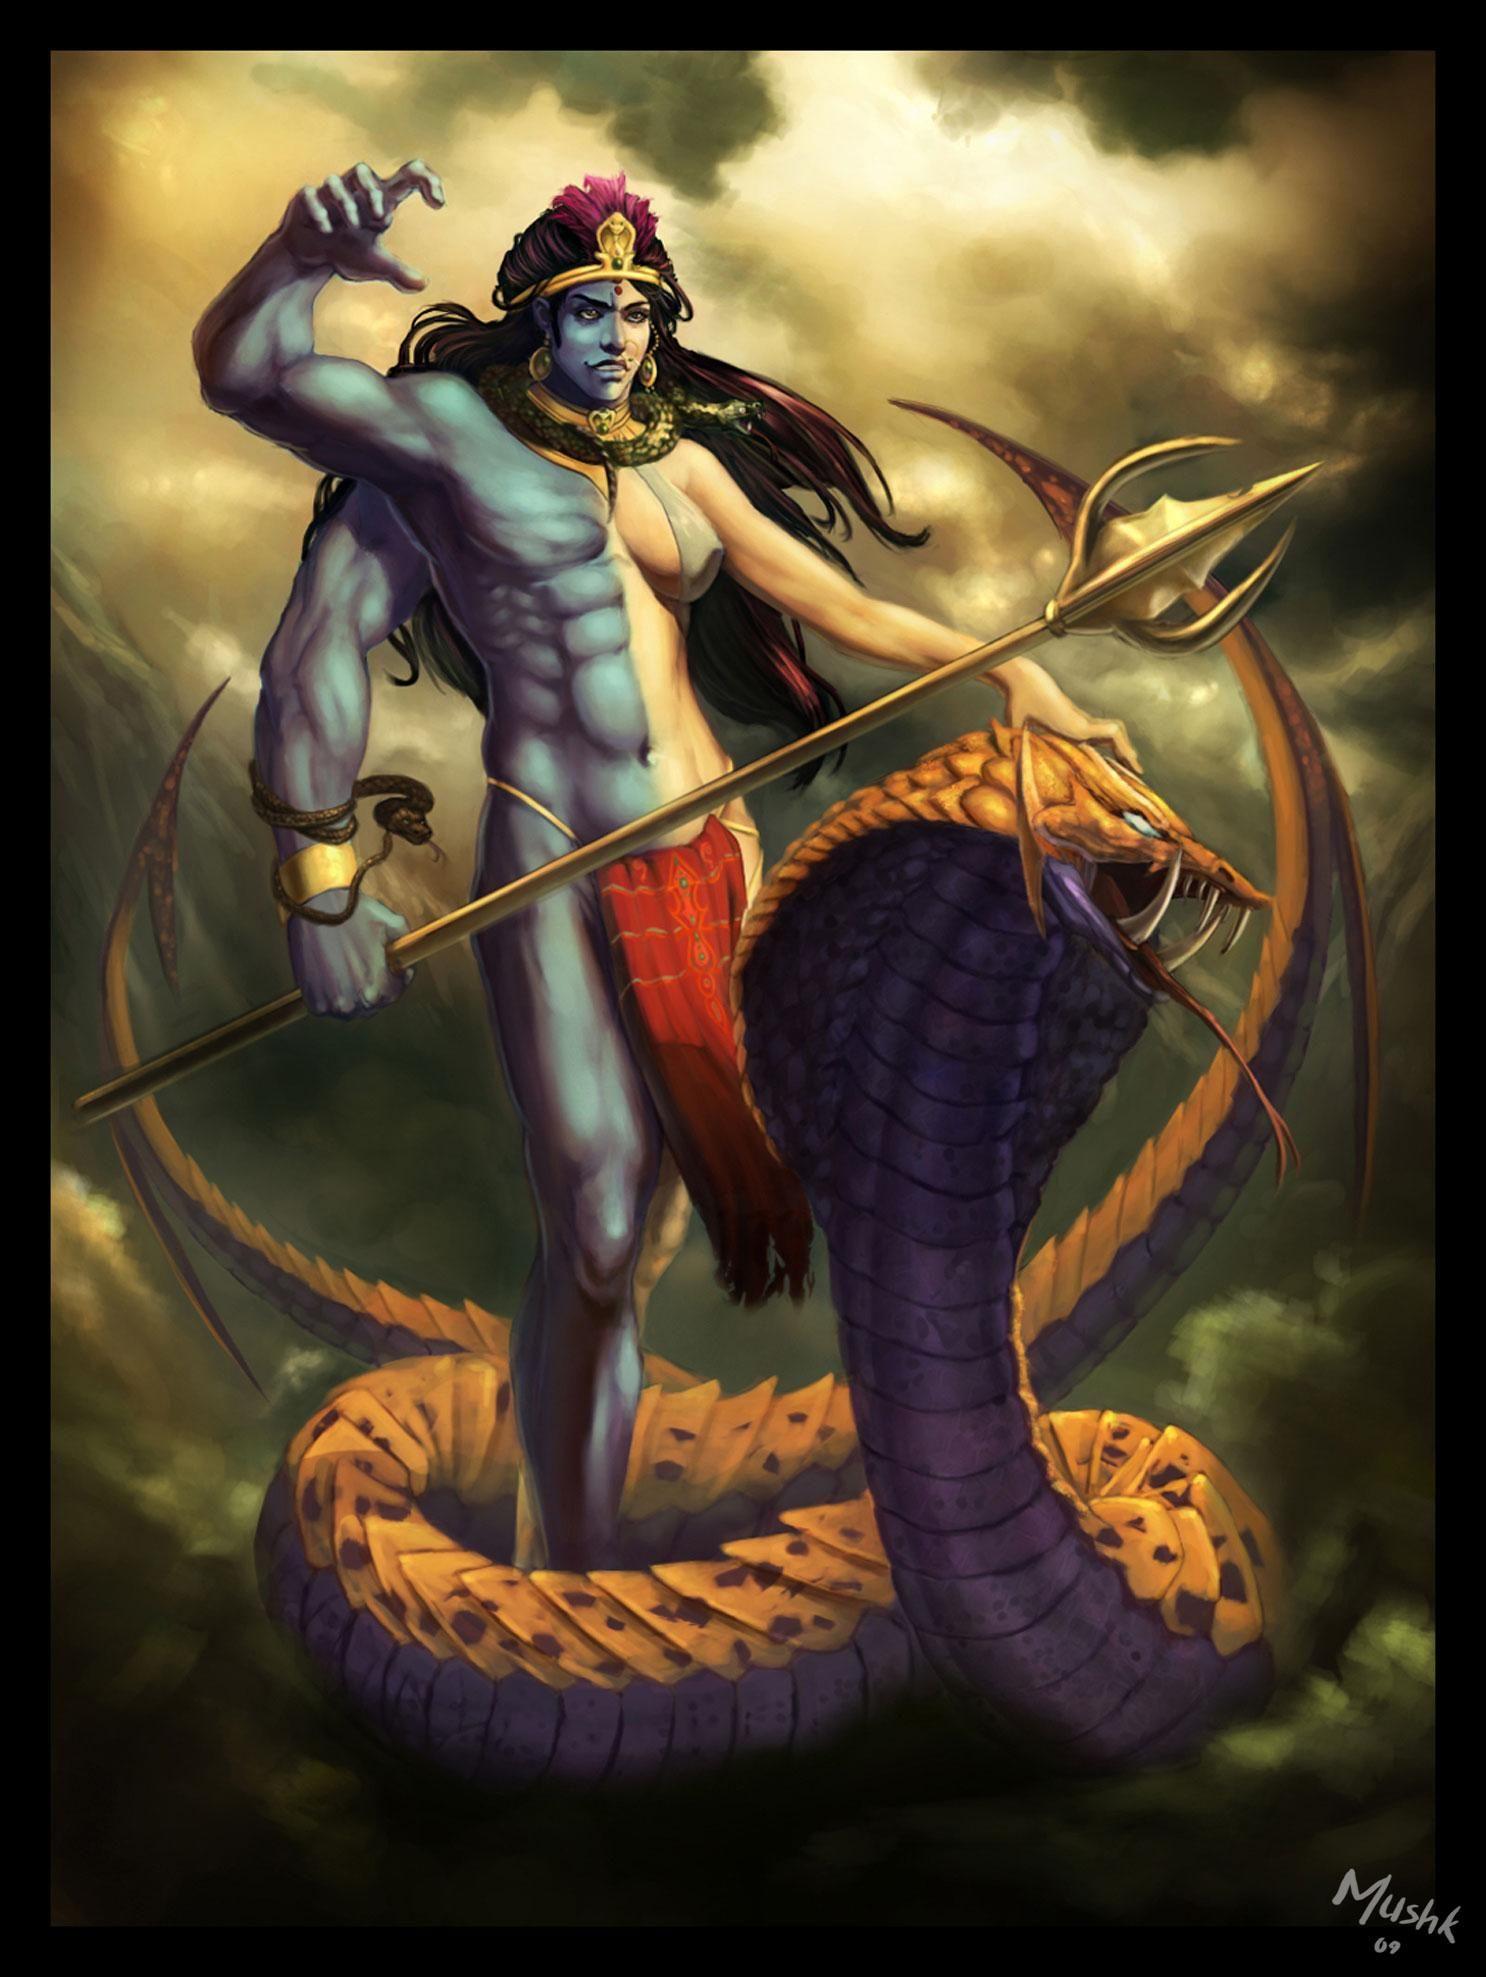 Lord Shiva Wallpaper 4K, Smite, The Destroyer, 2022 Games